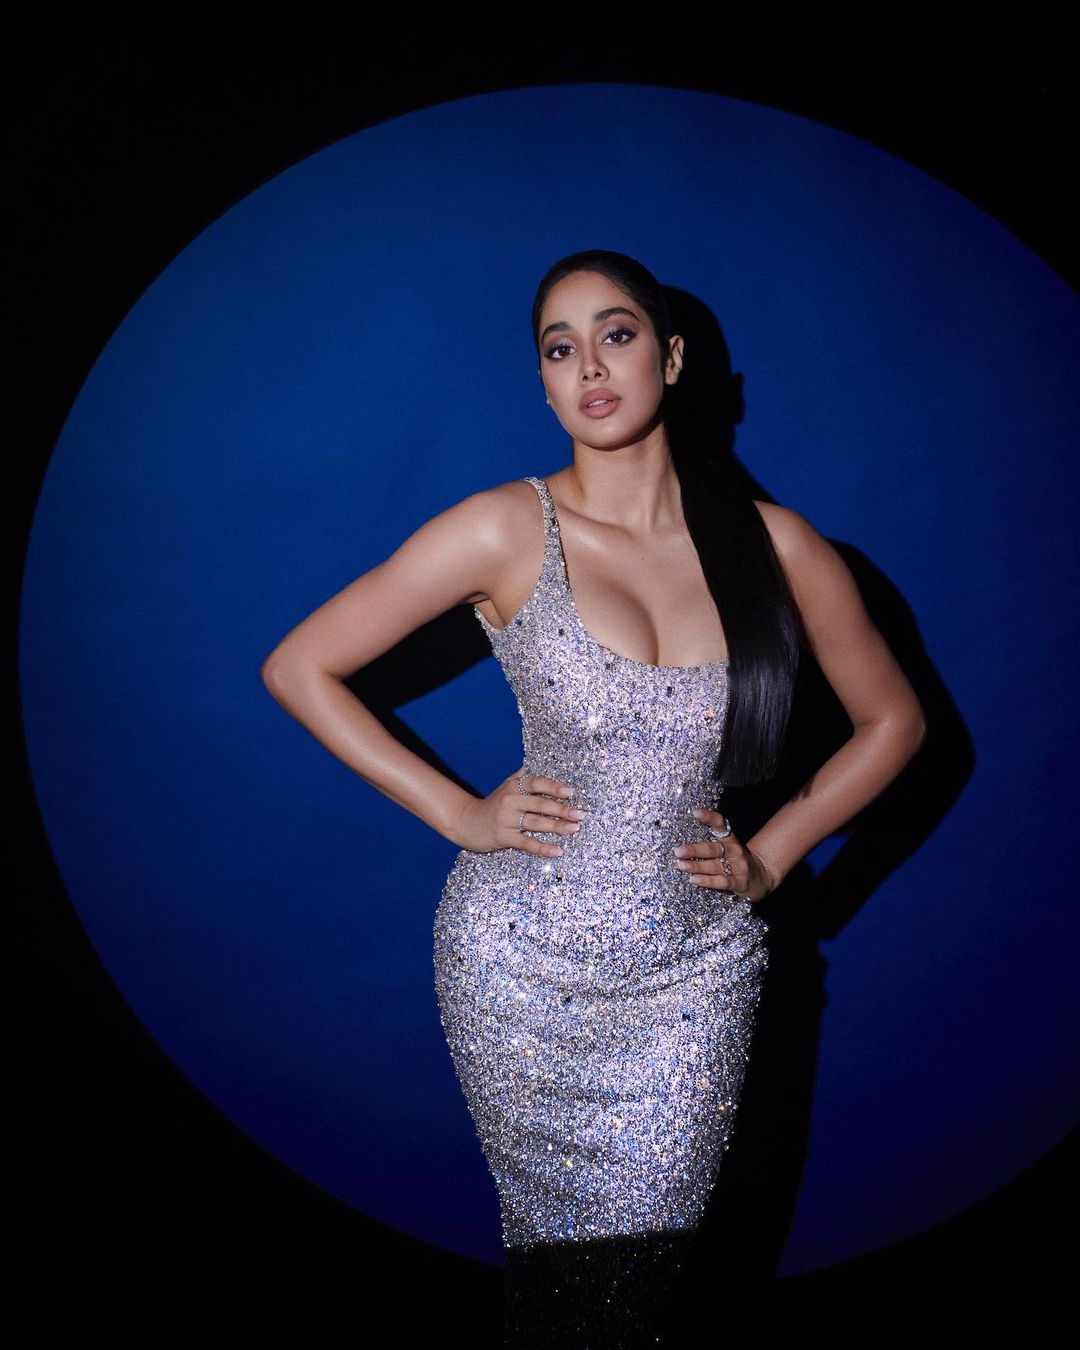 Janhvi Kapoor flaunts her curves in the silver sequinned dress